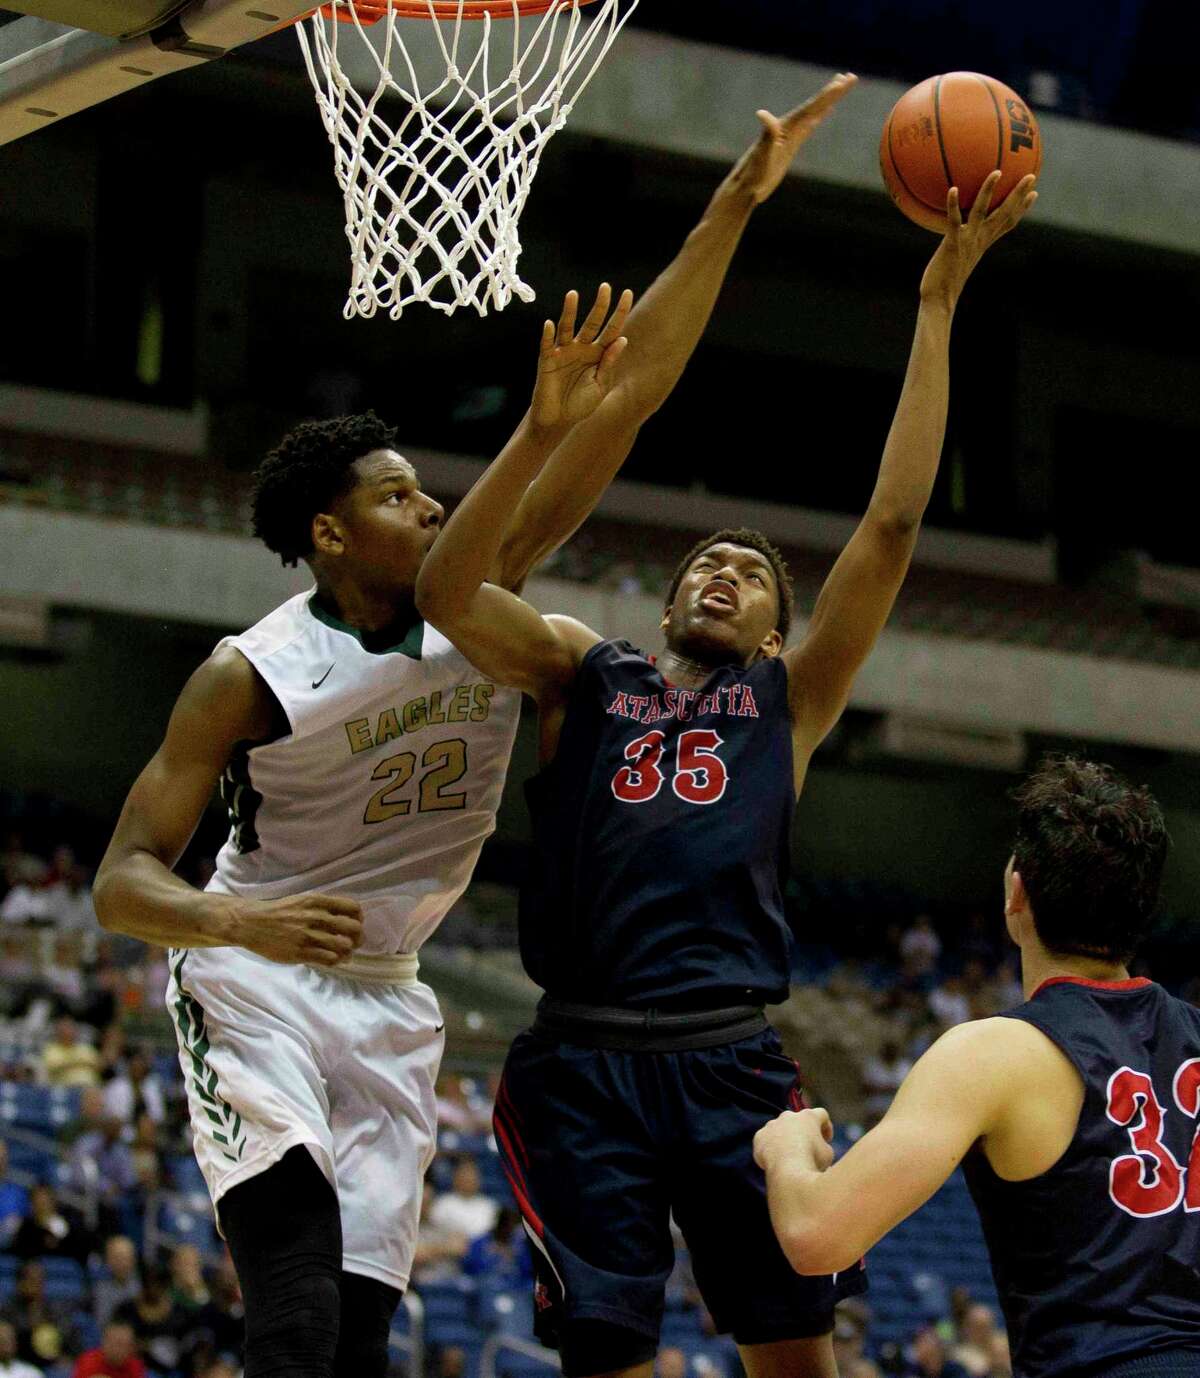 Atascocita forward Fabian White gets his shot blocked by Desoto forward Marques Bolde during the fourth quarter of a UIL Class 6A boys high school state final basketball game, Saturday, March 12, 2016, in San Antonio.